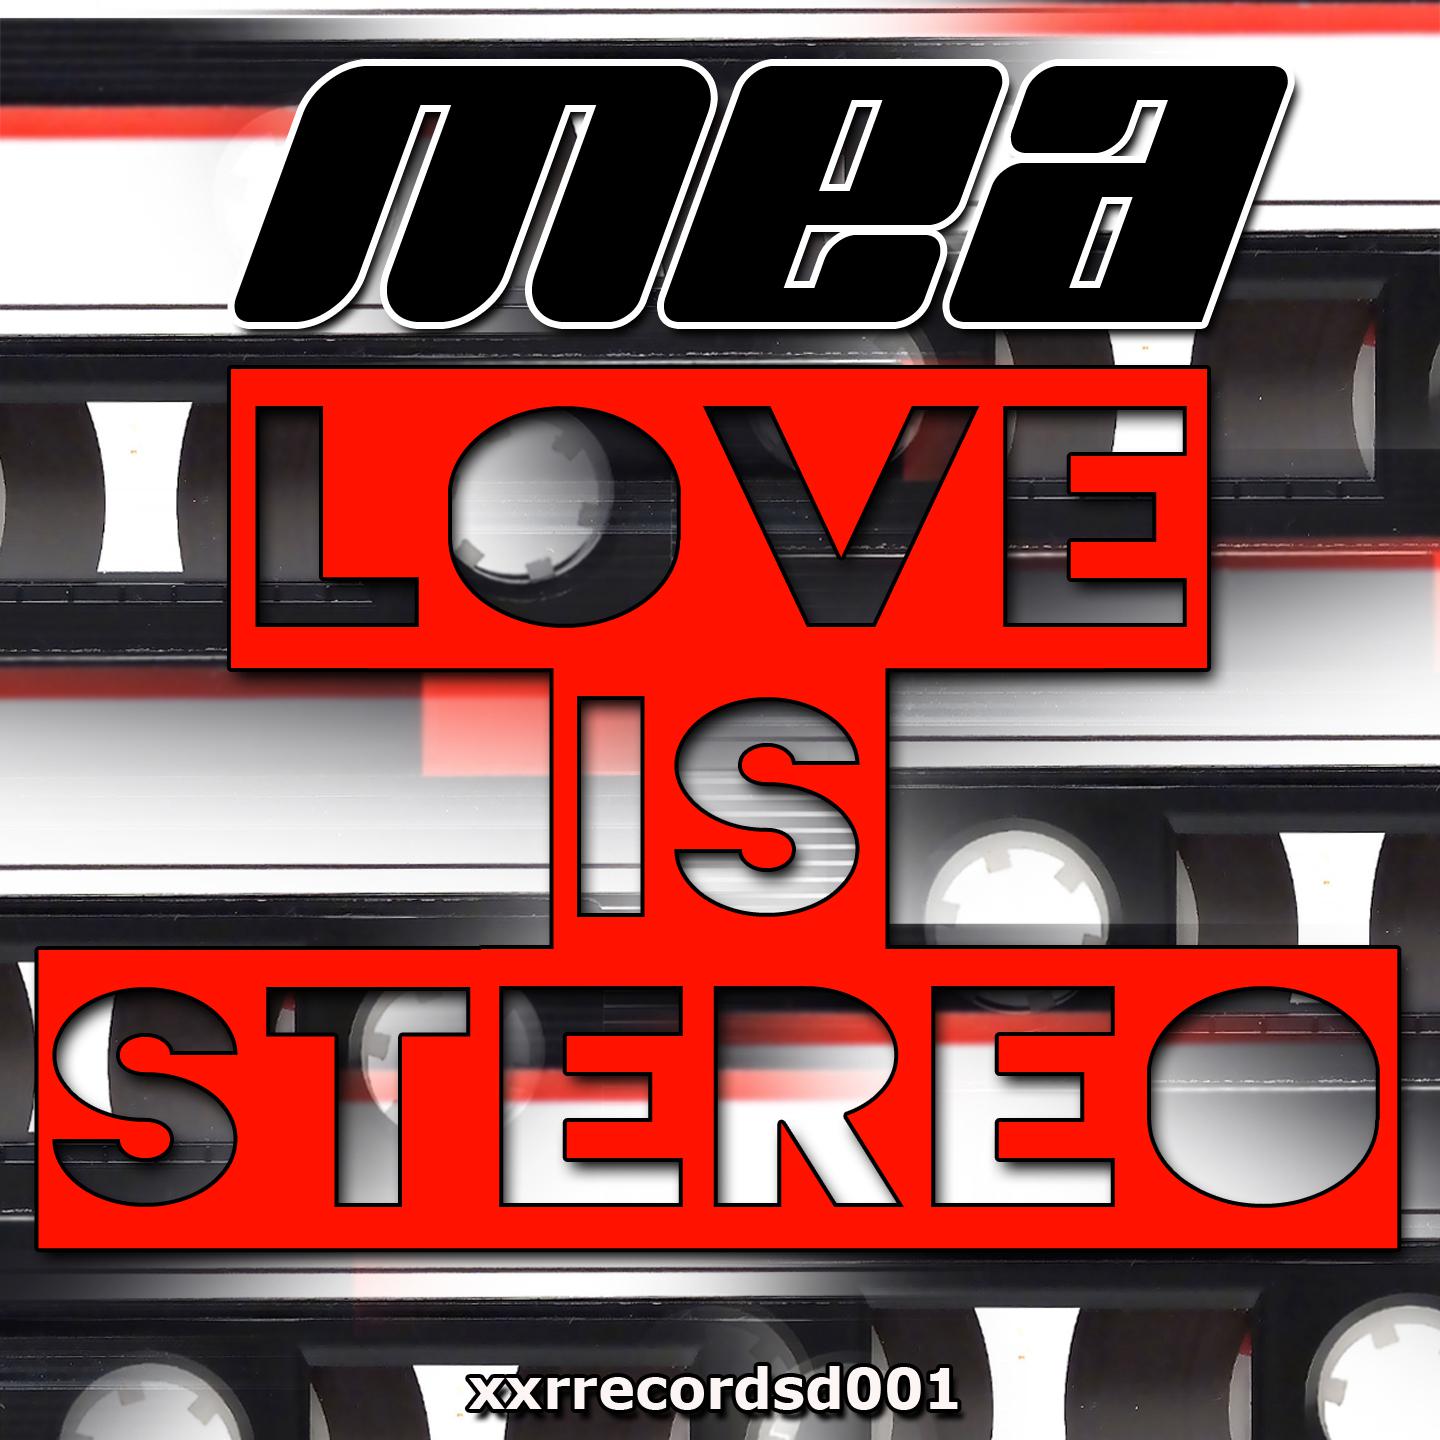 Love Is Stereo